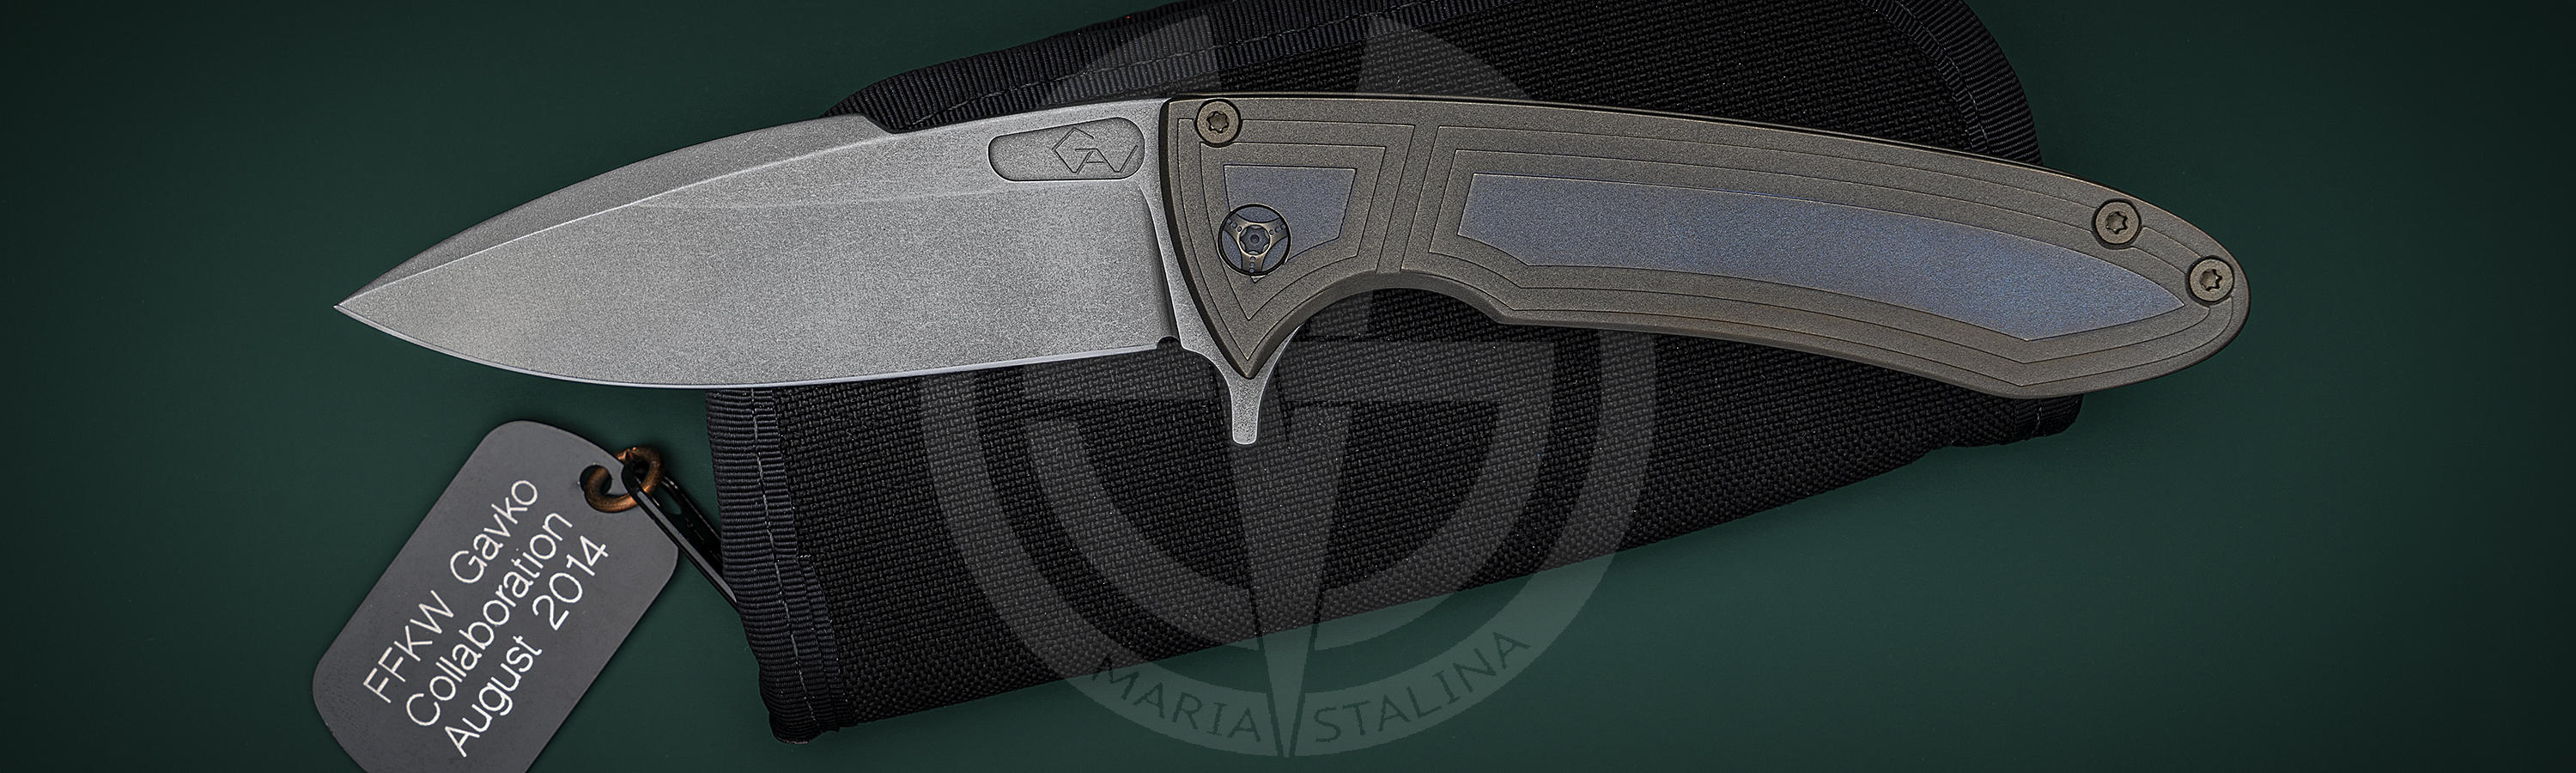 Ferrum Forge and Mike Gavik Collaboration